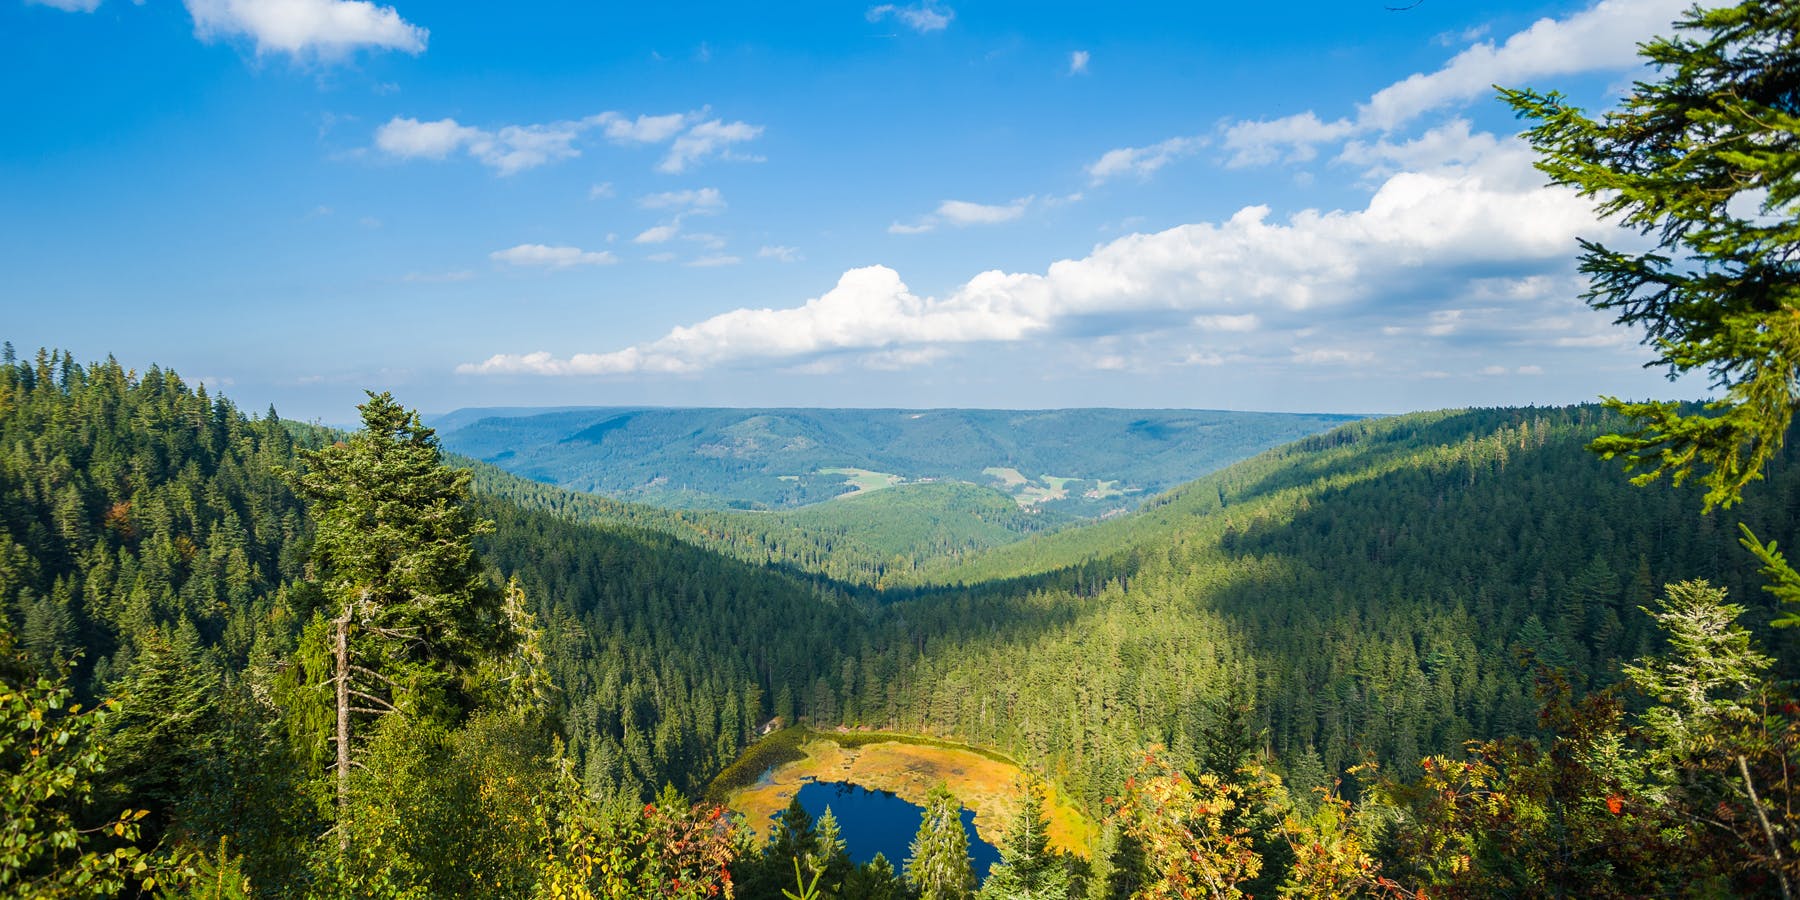 Luxury Holiday in the Black Forest